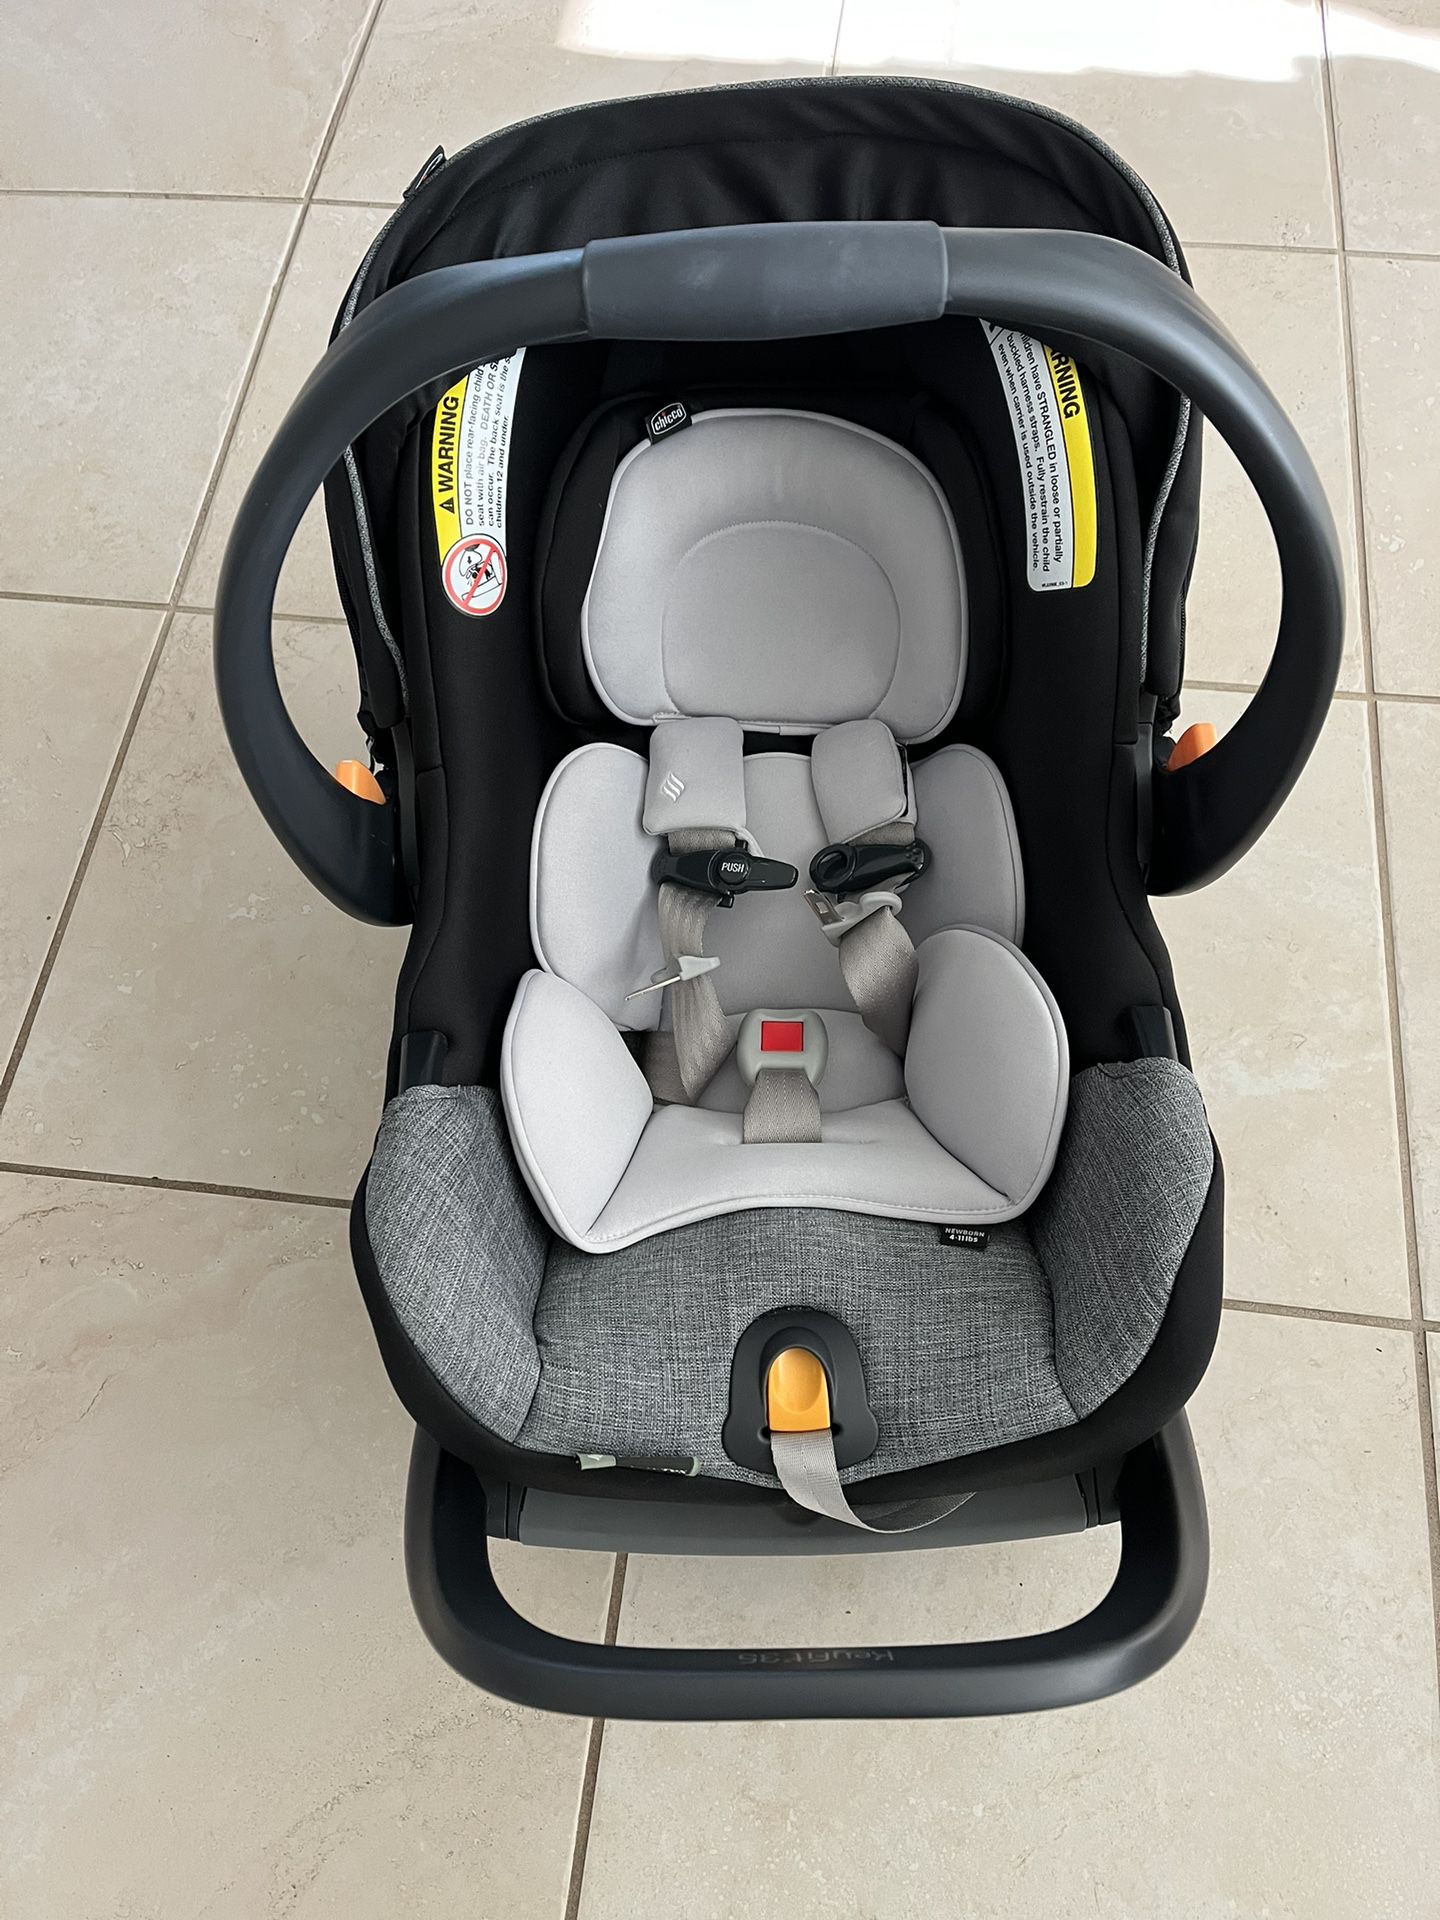 KeyFit 35 Zip ClearTex Infant Car Seat Carseat- Obsidian